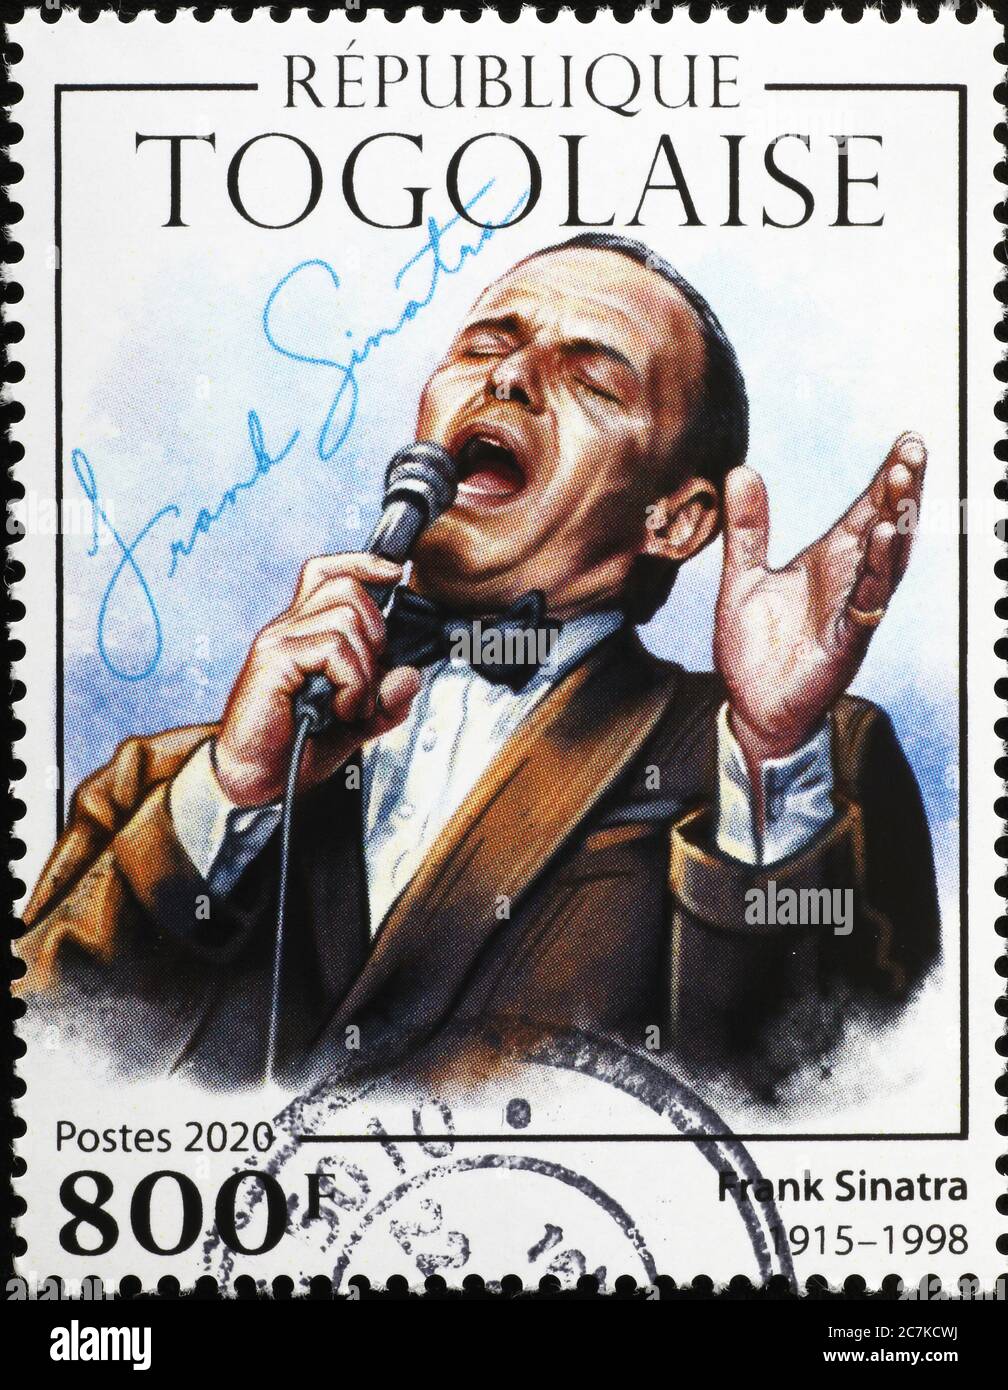 Frank Sinatra in concert on postage stamp of Togo Stock Photo